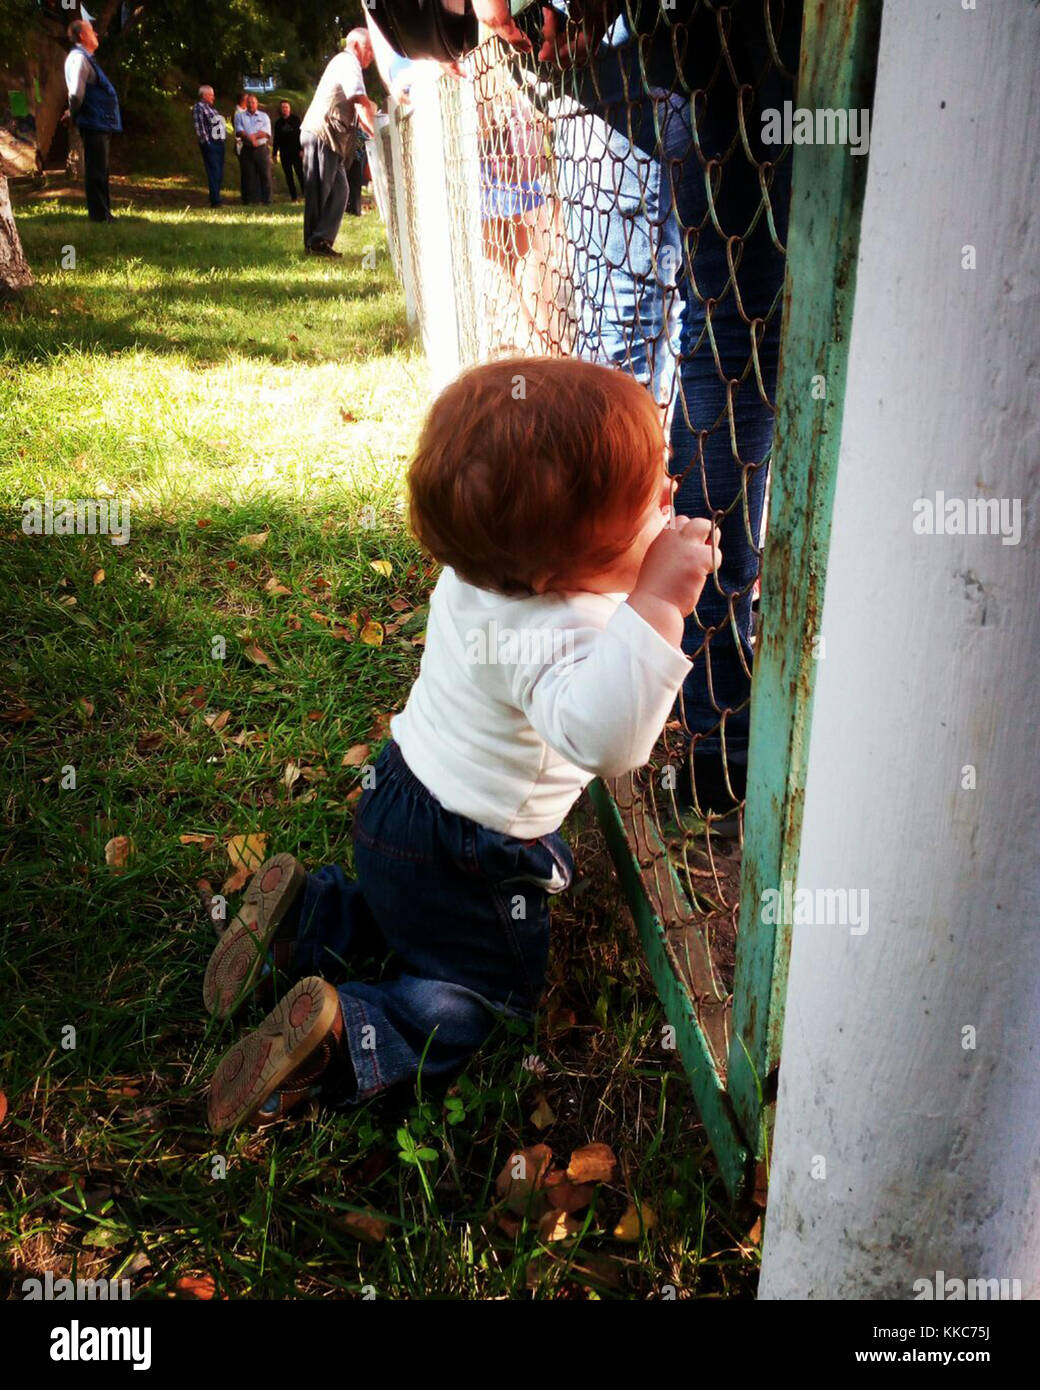 Cute little baby with ginger hair watching through the fence standing on knees alone among adult people around. Stock Photo